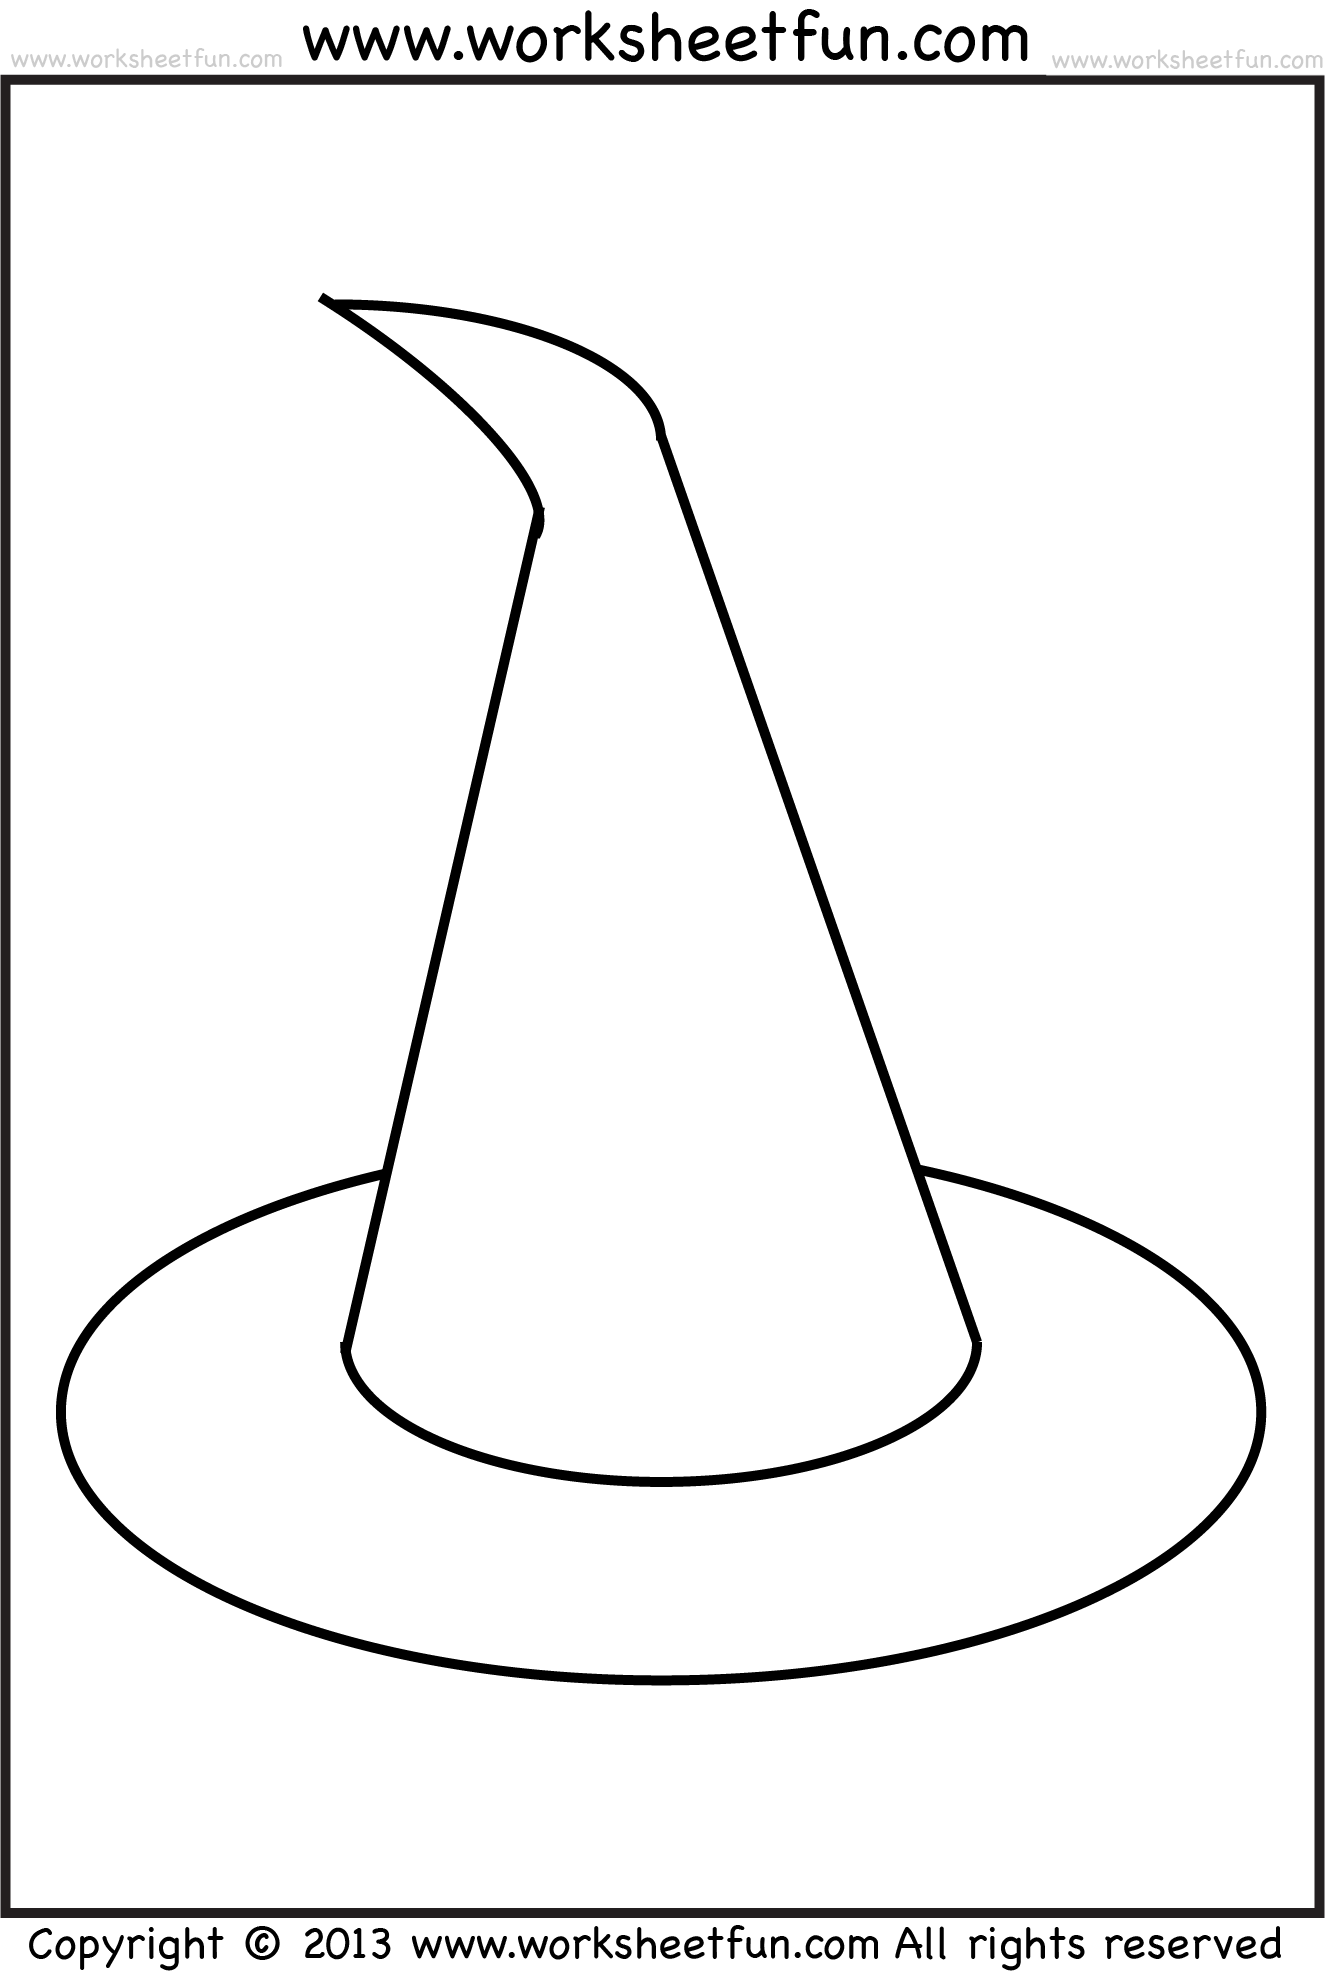 Witch Hat – Tracing, Coloring and Cutting- 5 Halloween Worksheets